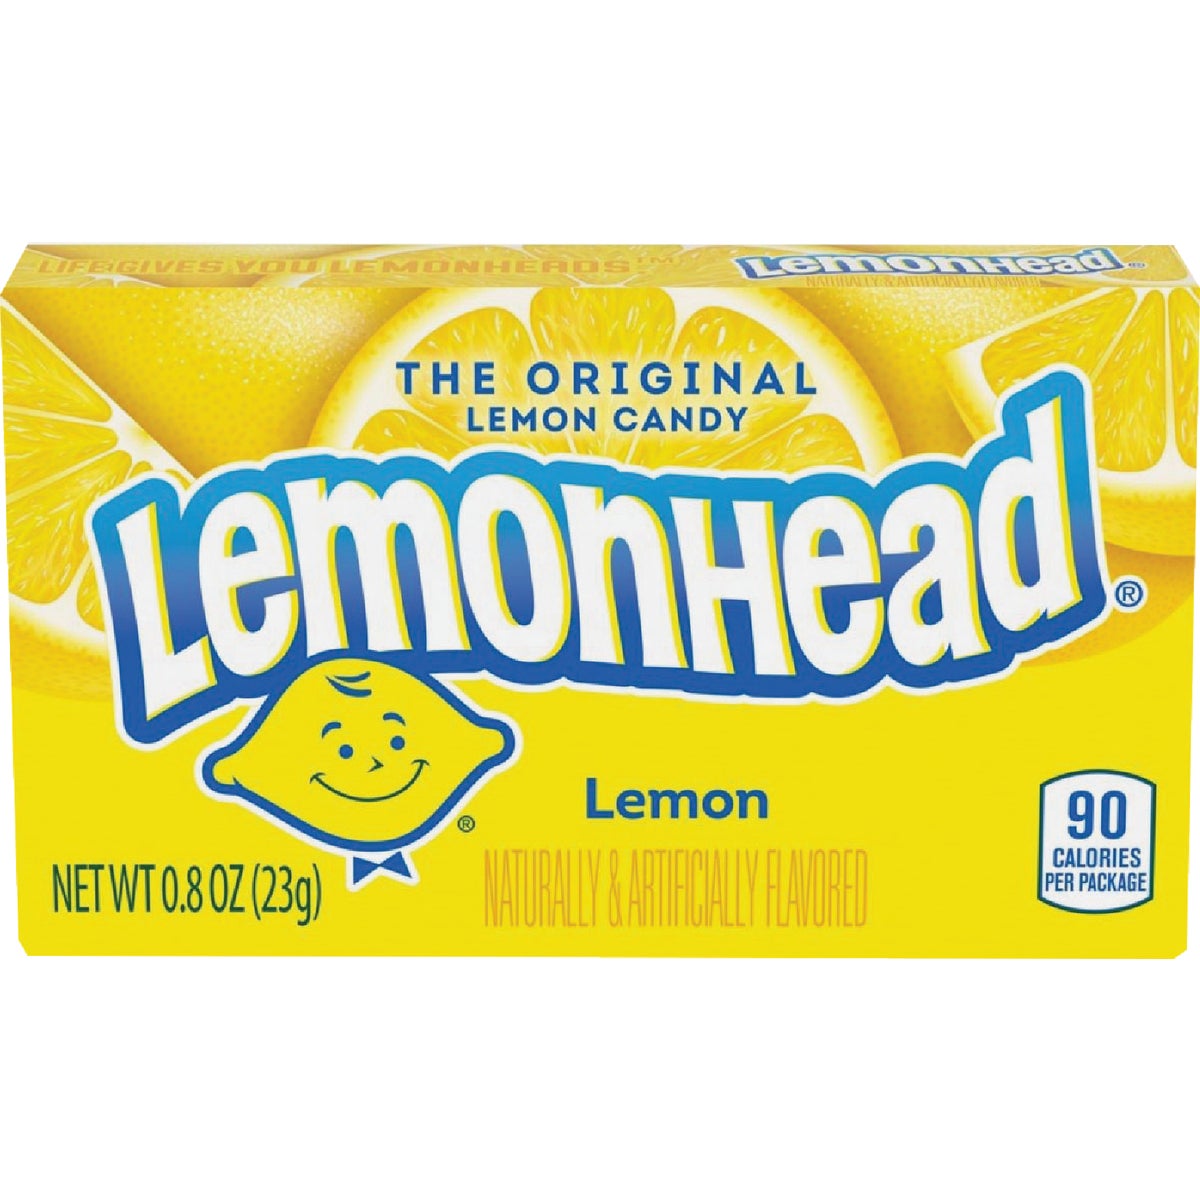 Item 970332, Lemon flavored candy is made with real lemon juice